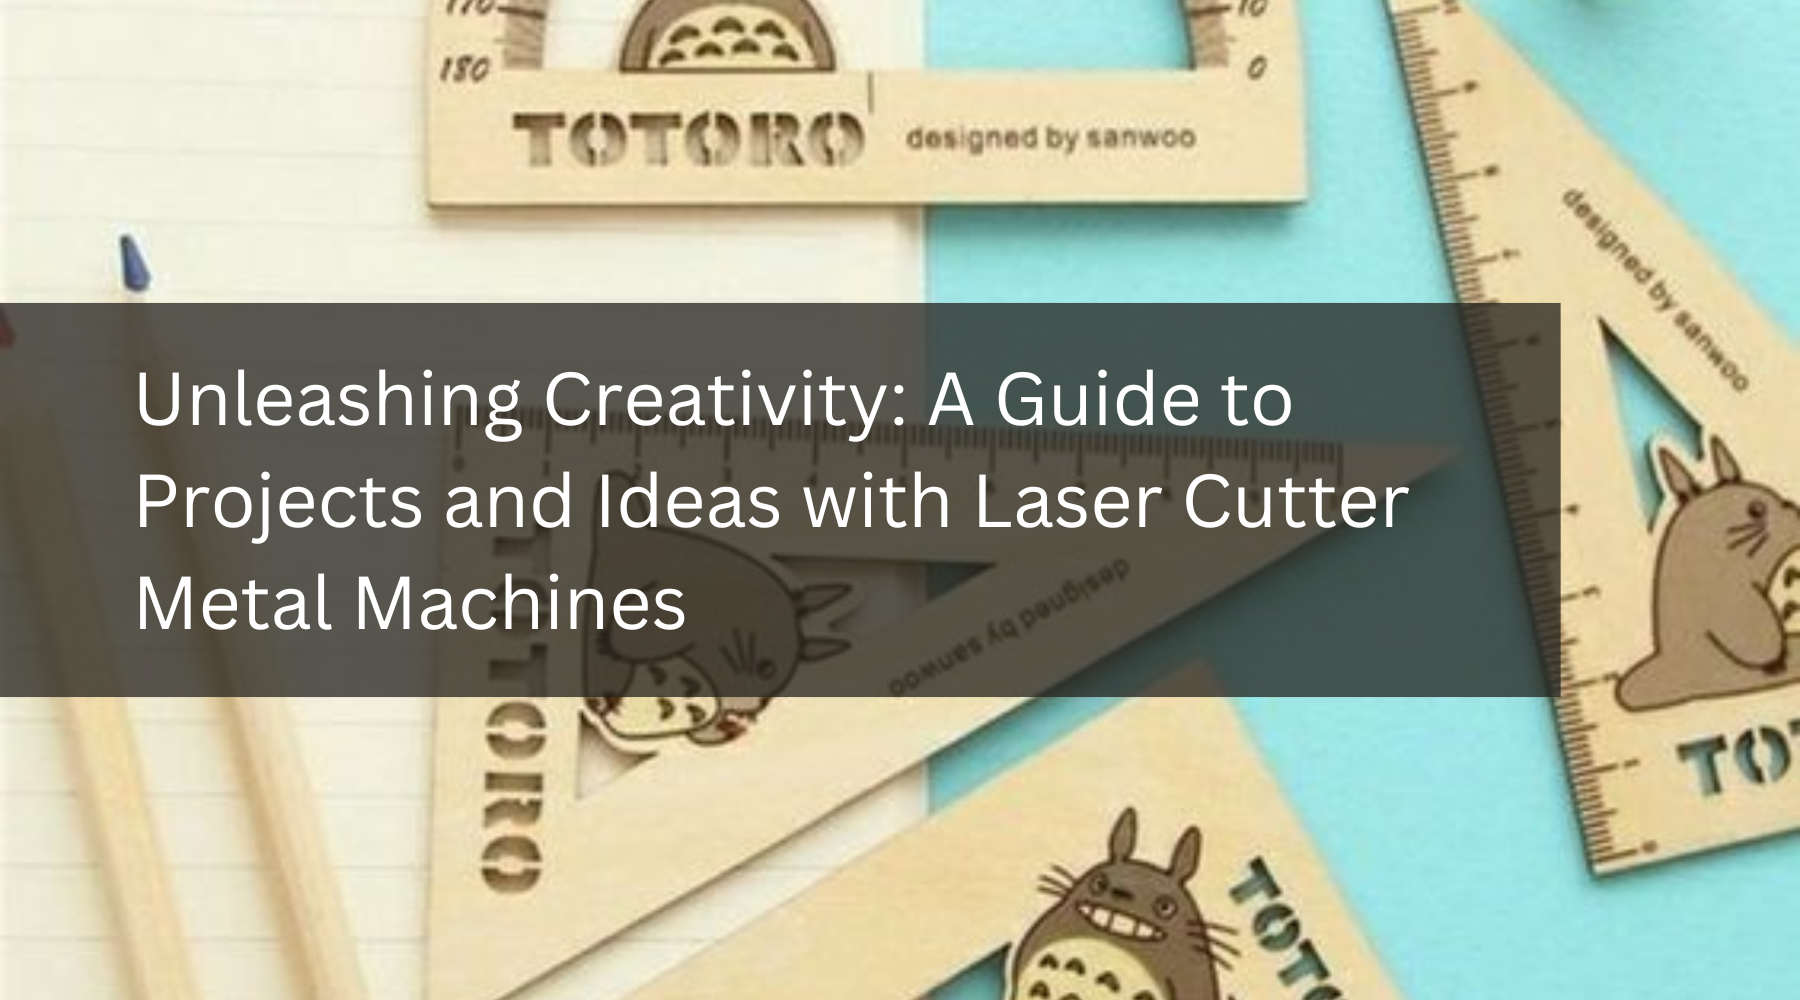 Unleashing Creativity: A Guide to Projects and Ideas with Laser Cutter Metal Machines